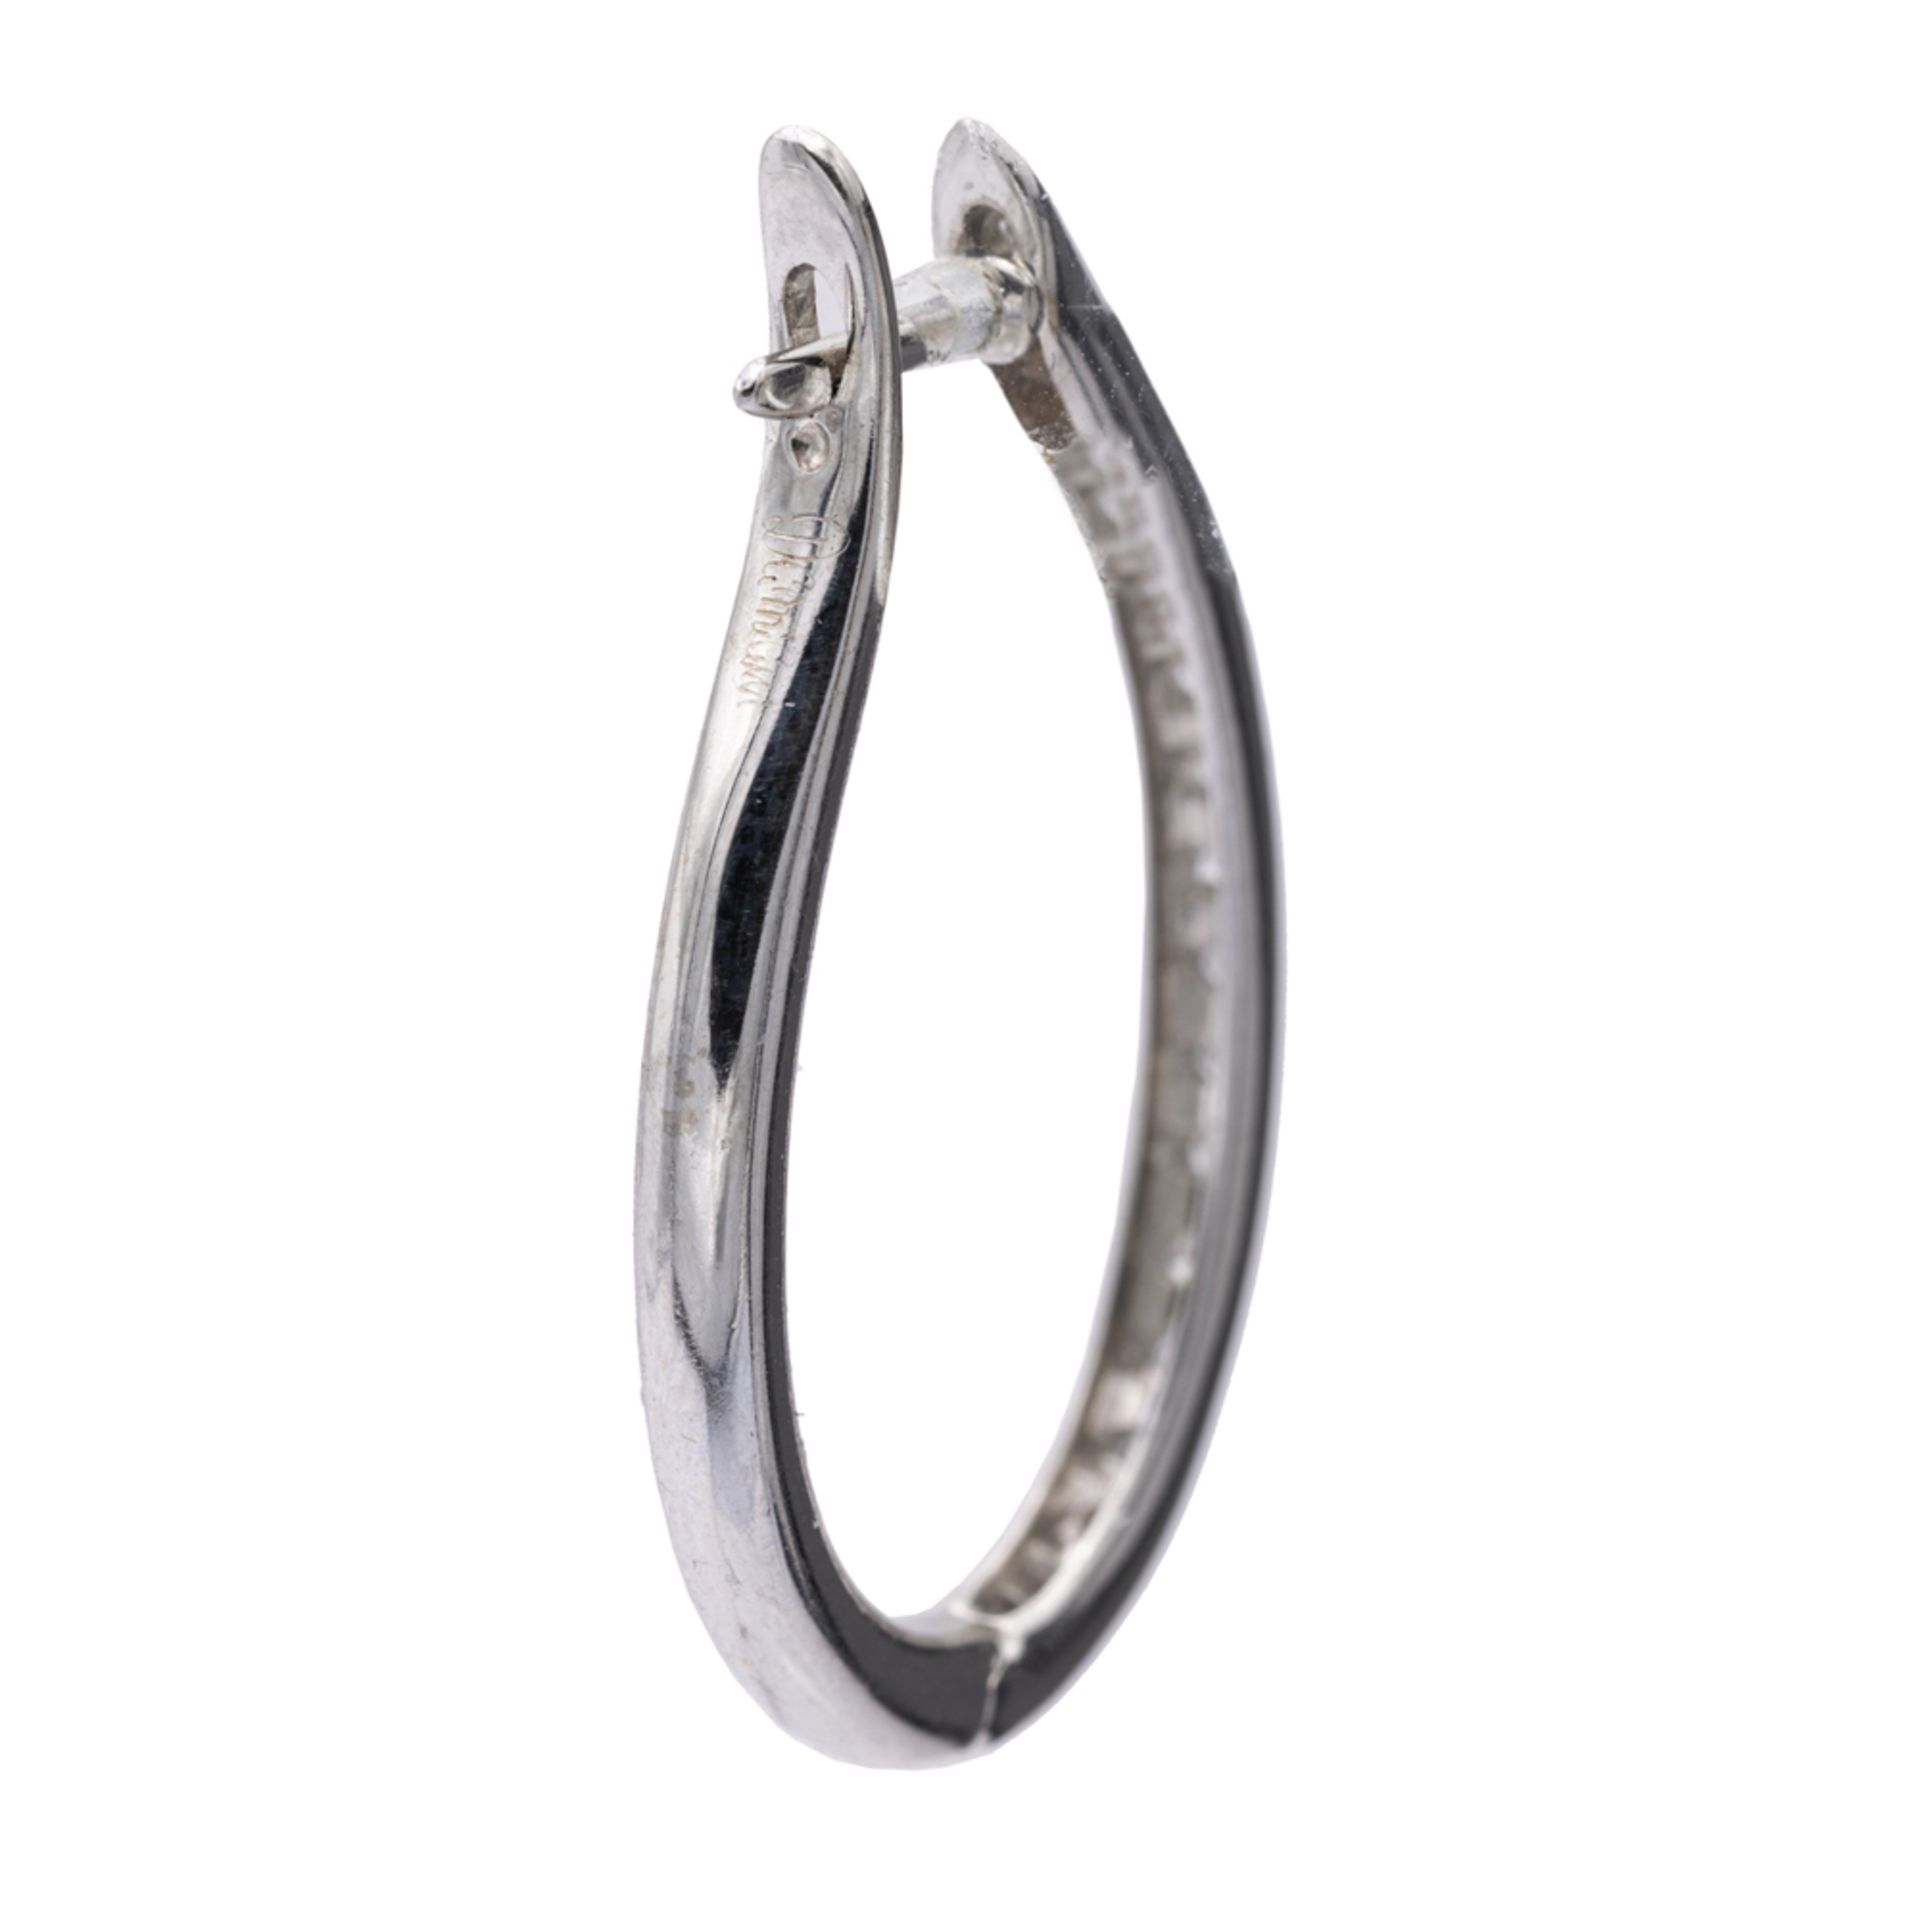 Damiani, oval 18kt white gold and diamonds earrings - Image 2 of 2